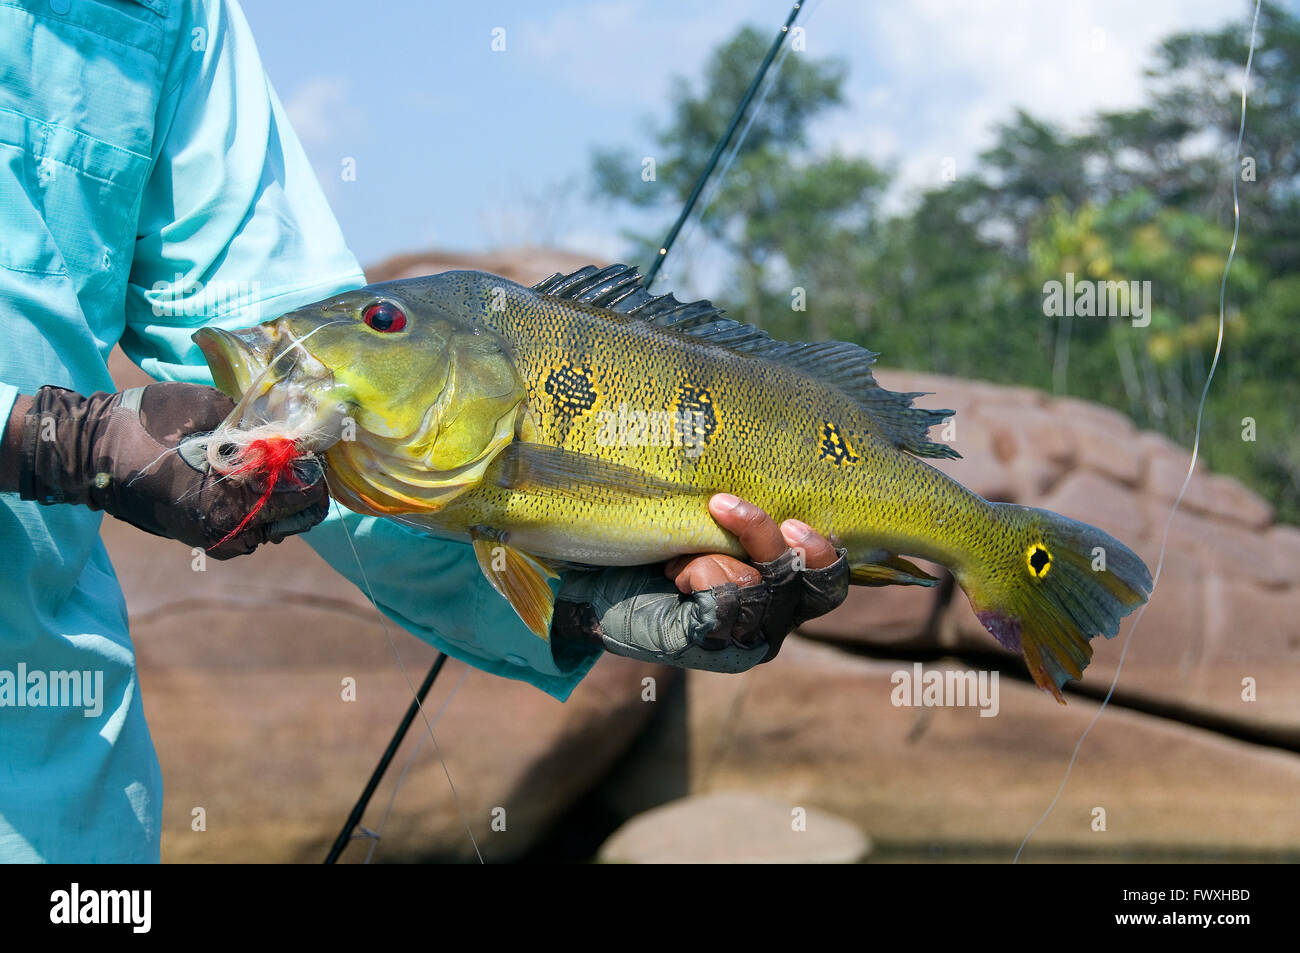 An angler lifts a giant butterfly peacock bass caught on a fly in lagoon waters off Colombia's Bocon River. Stock Photo